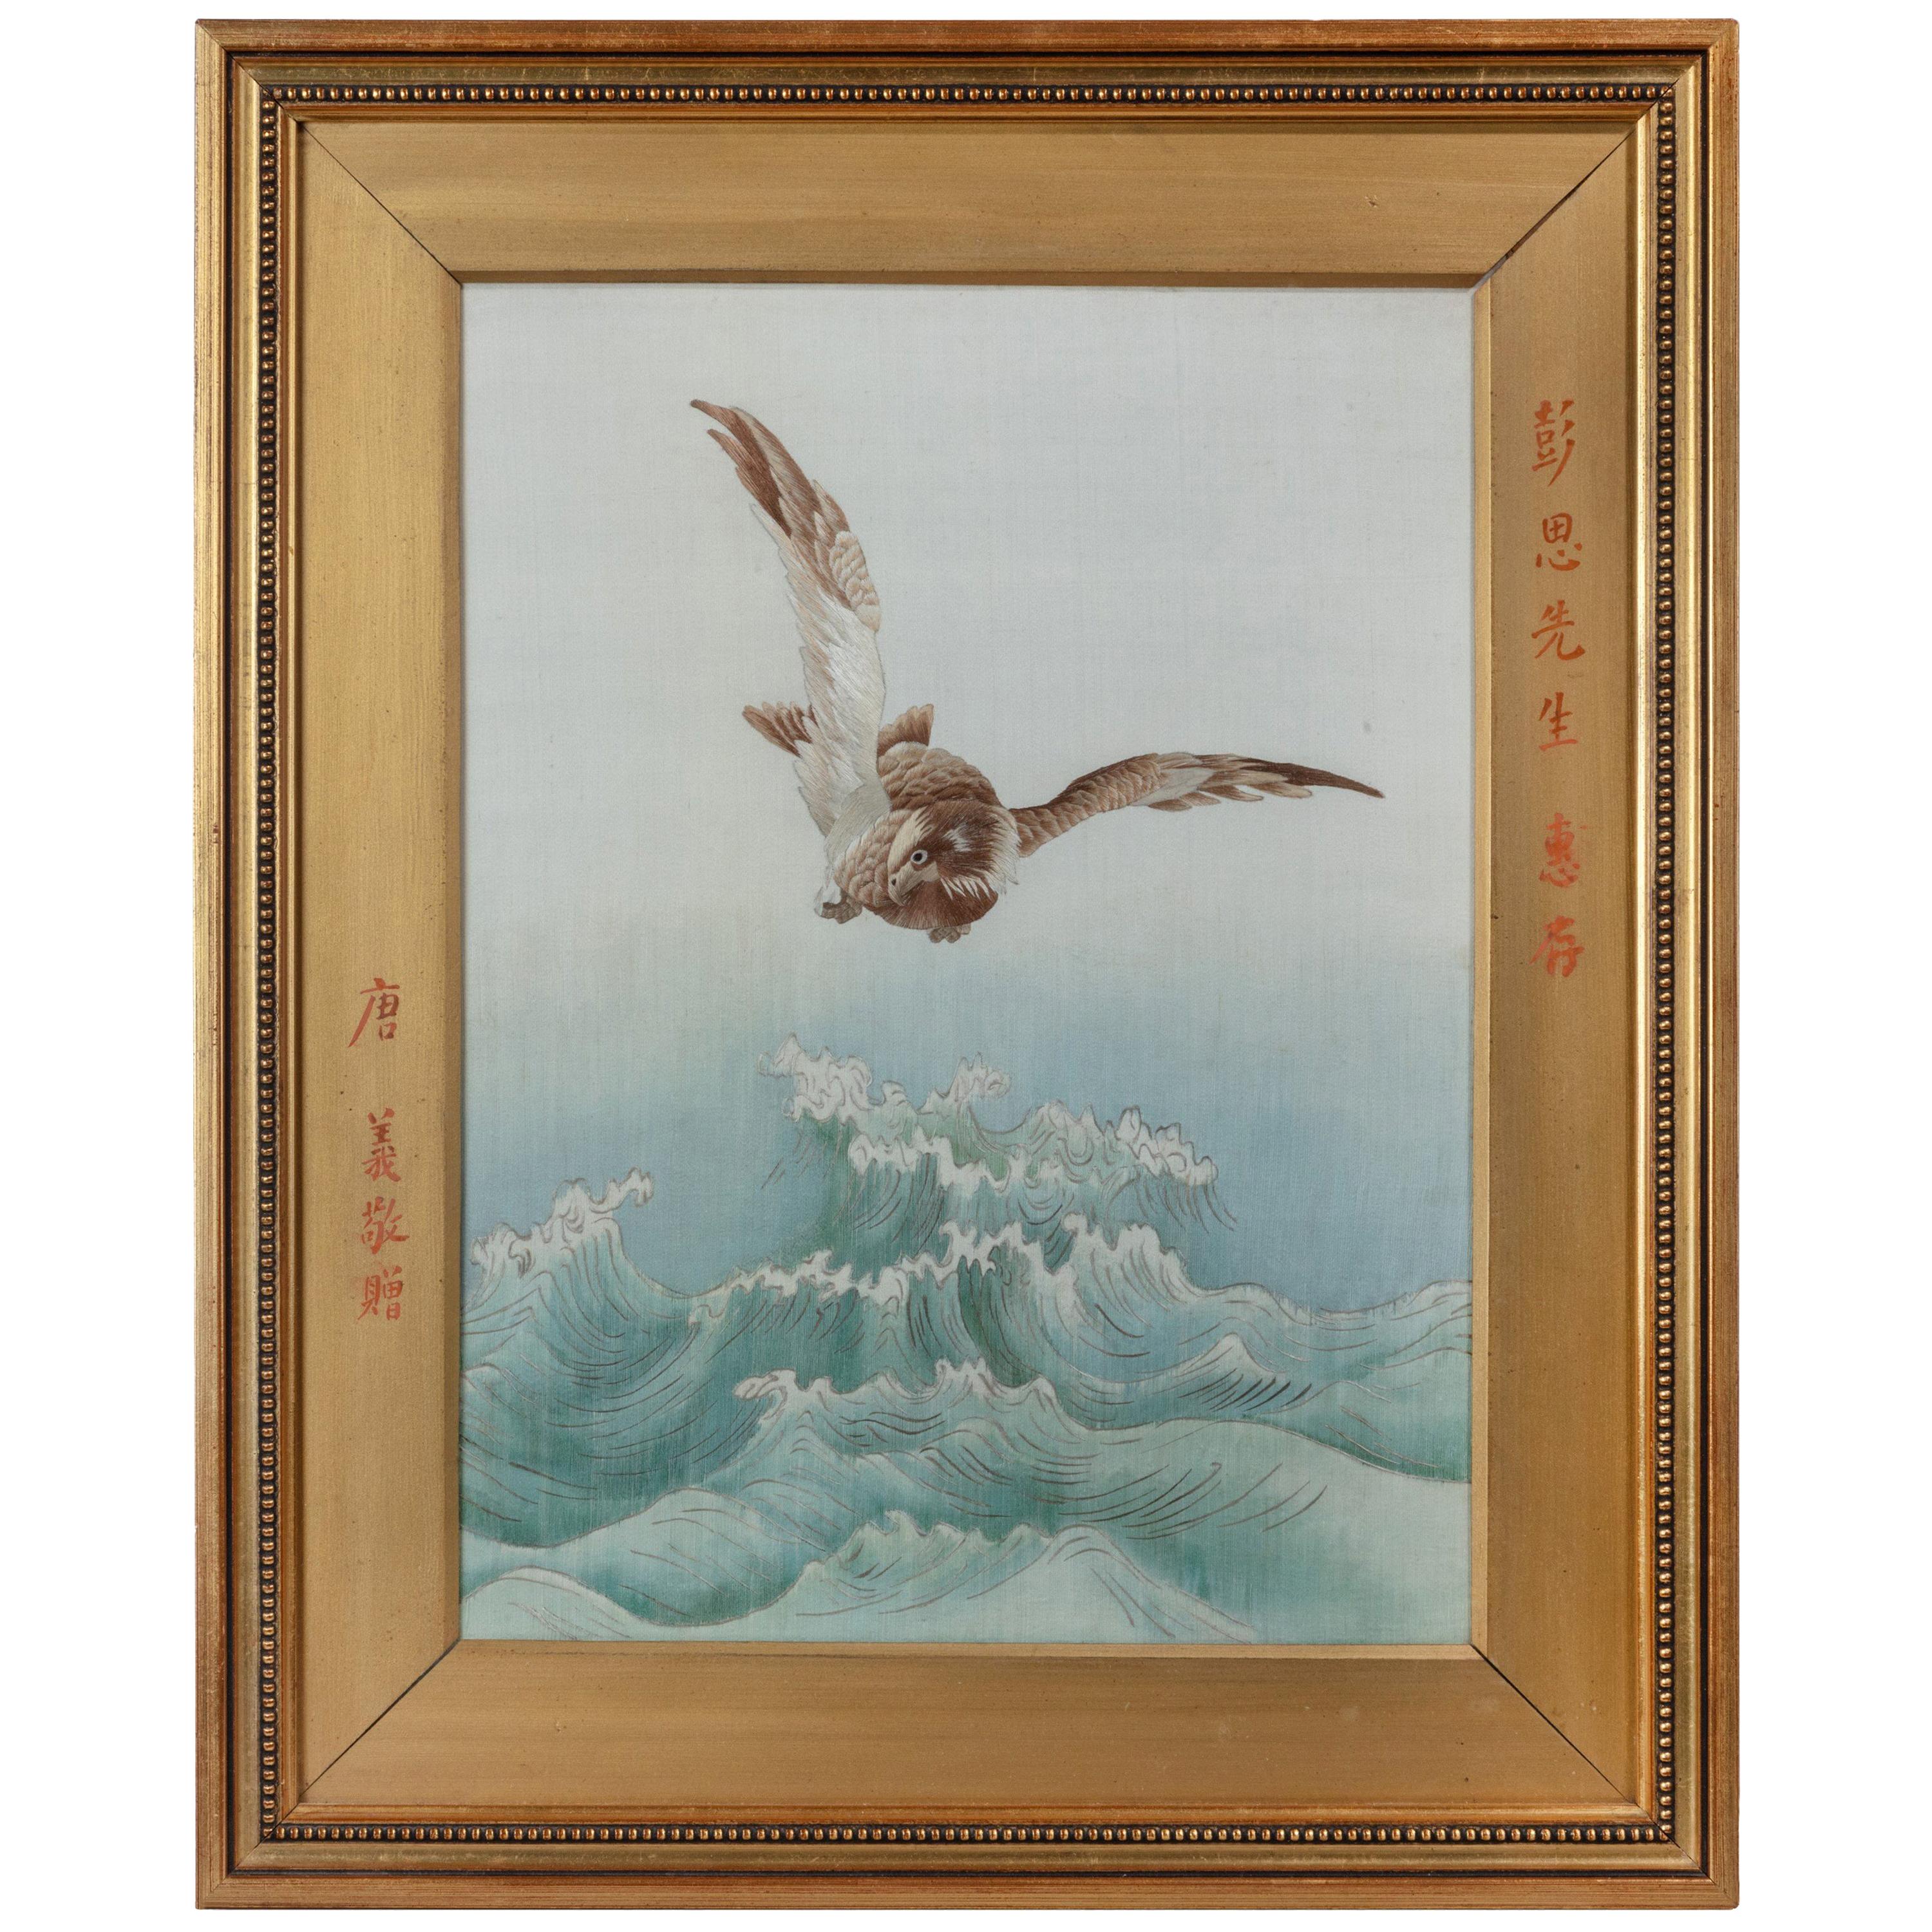 Embroidered Chinese Silk Picture of a Sea Eagle